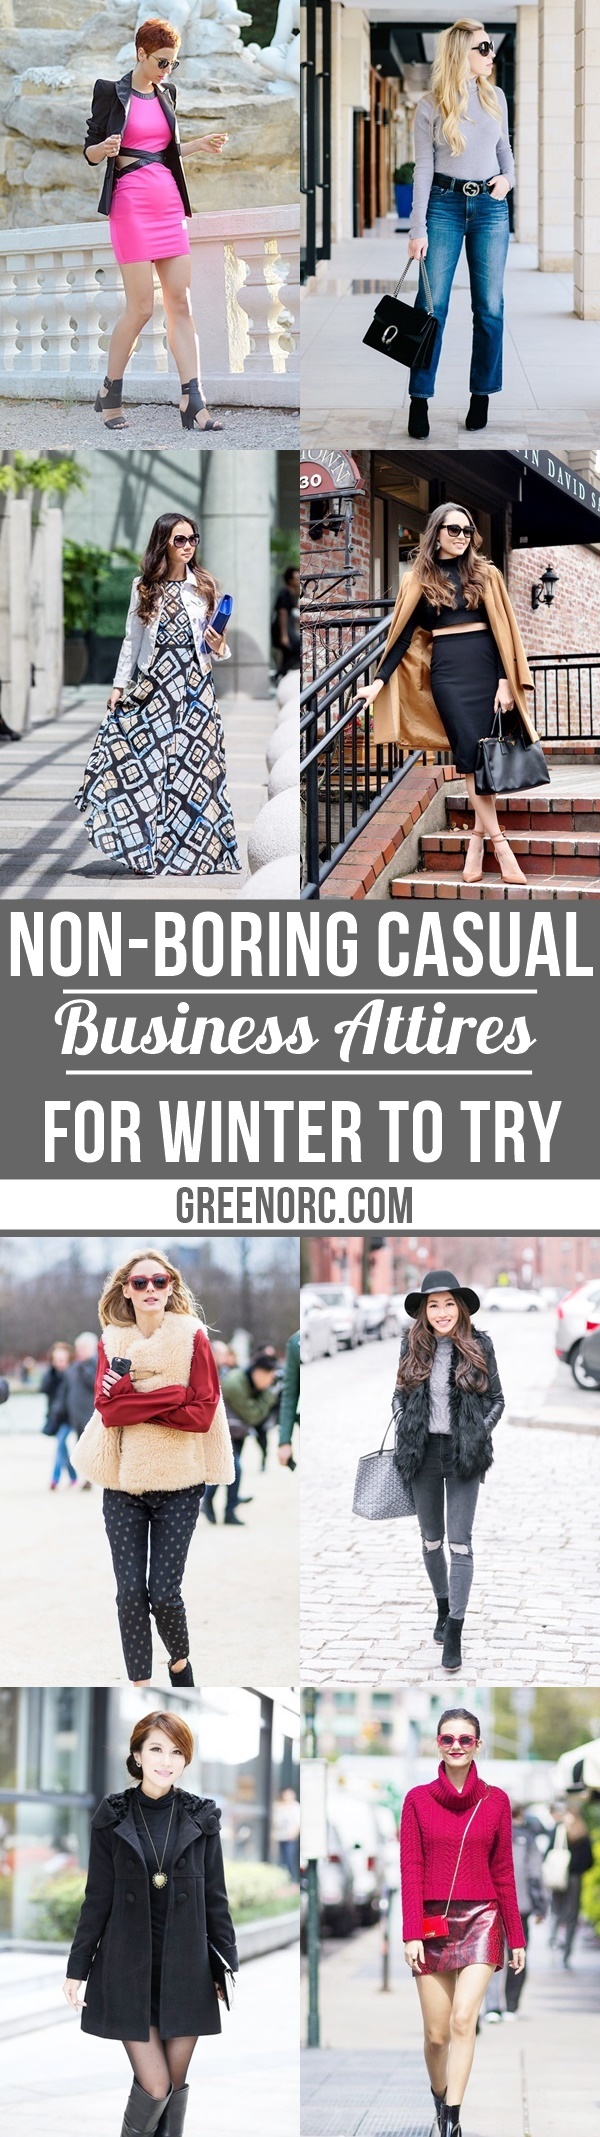 Non-Boring Casual Business Attires for Winter To Try